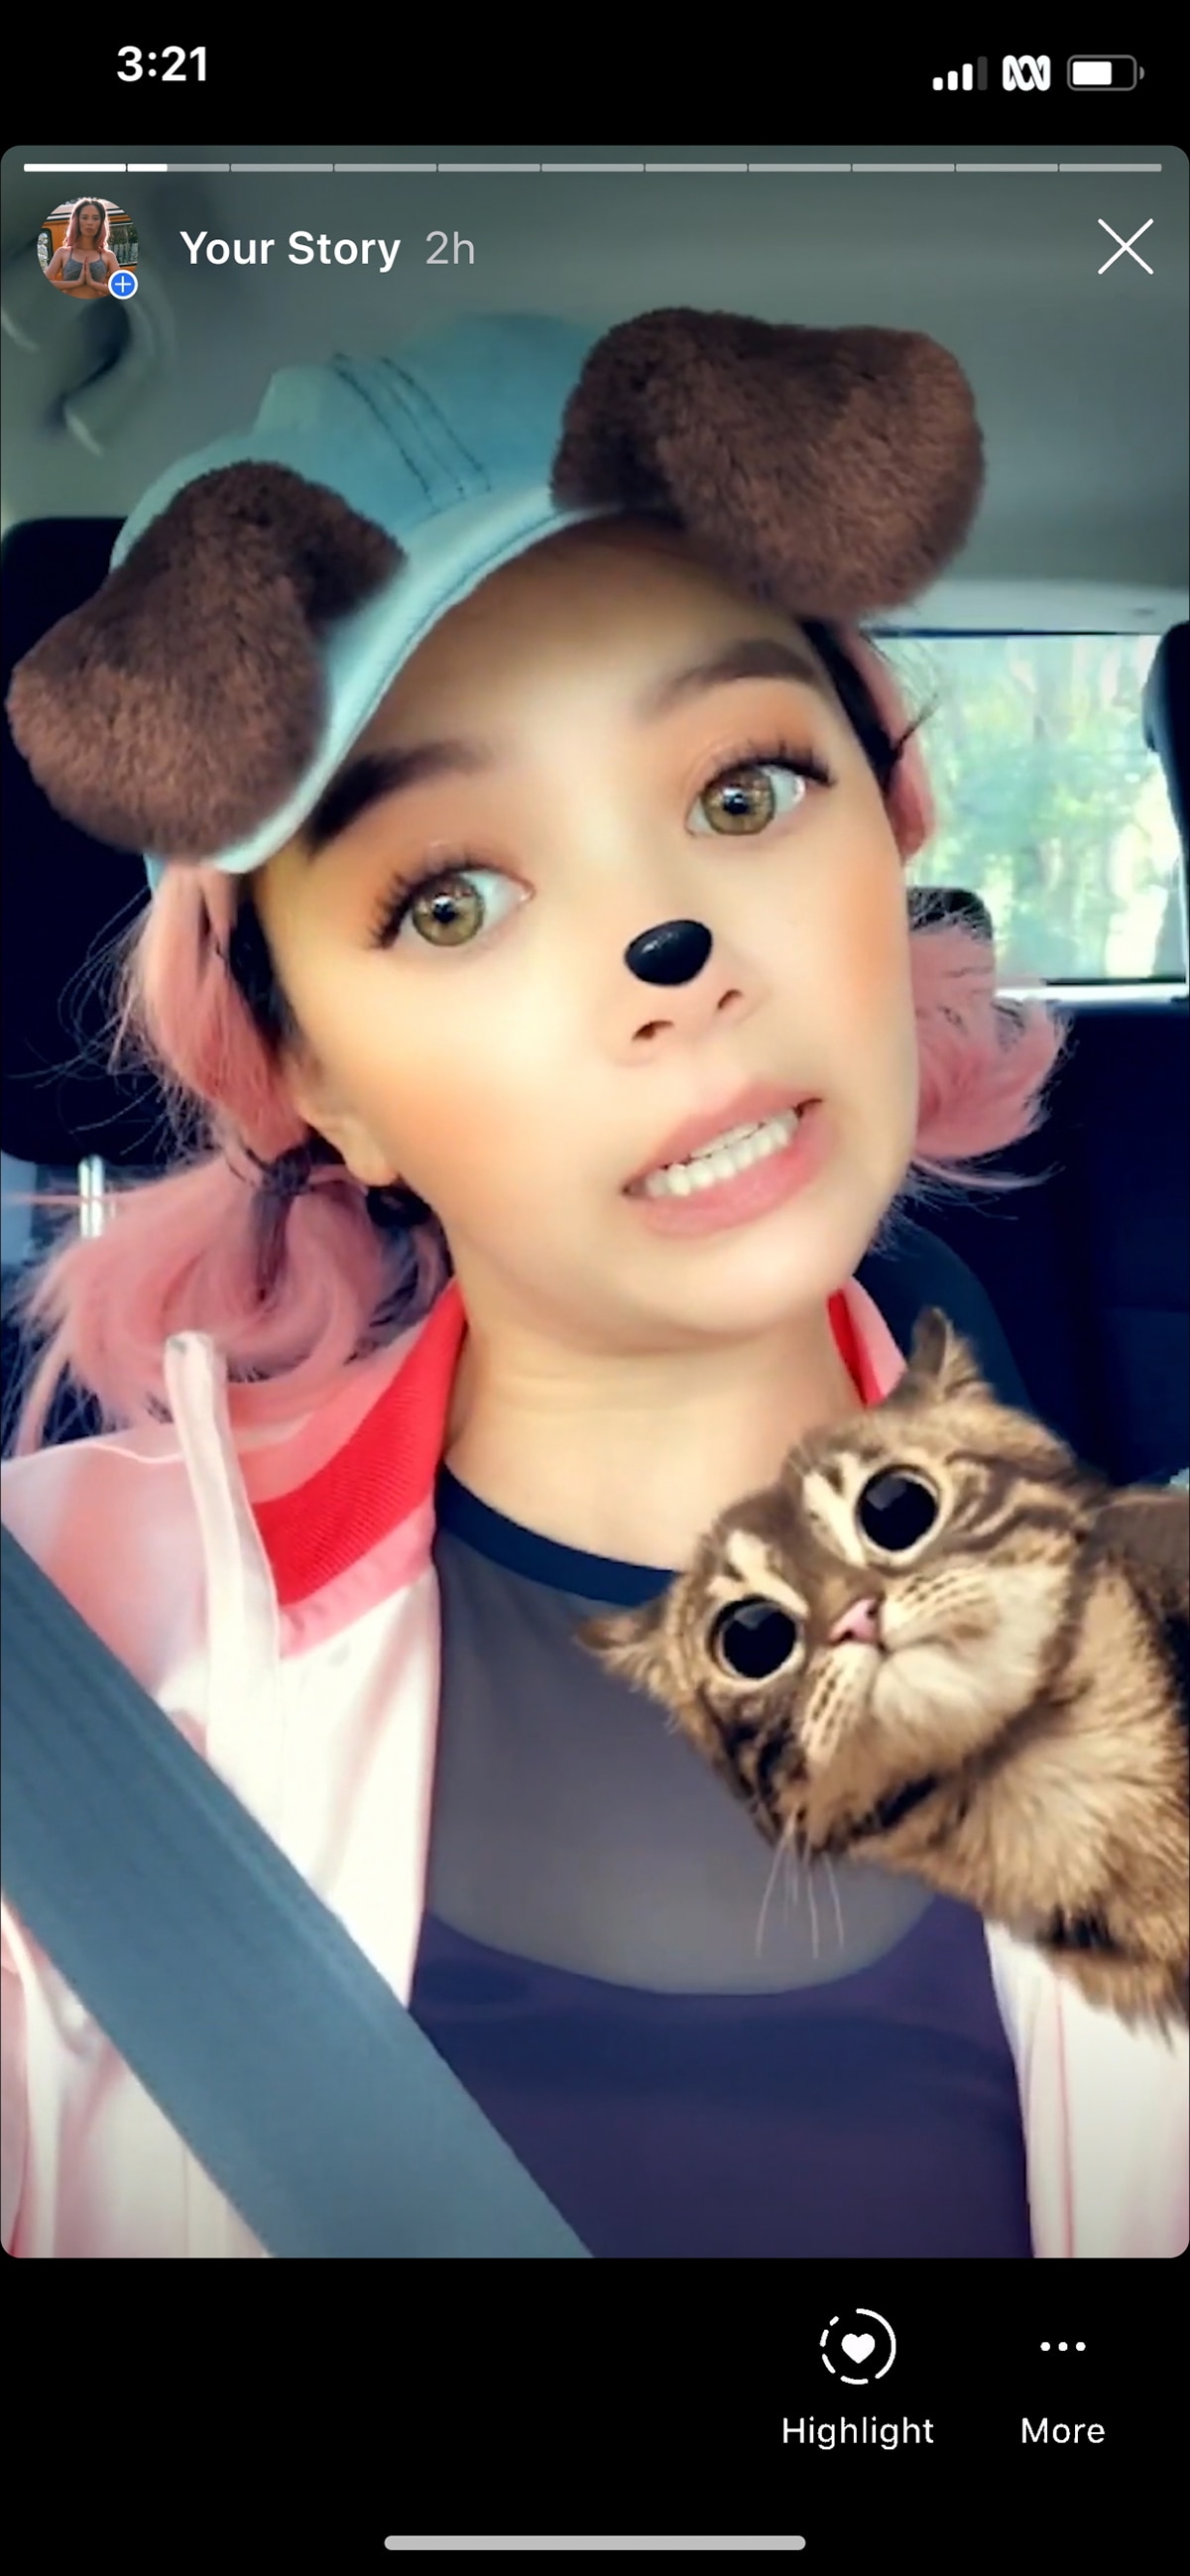 A screenshot of a woman sitting in car and posing in selfie mode with Instagram filters on top of face.